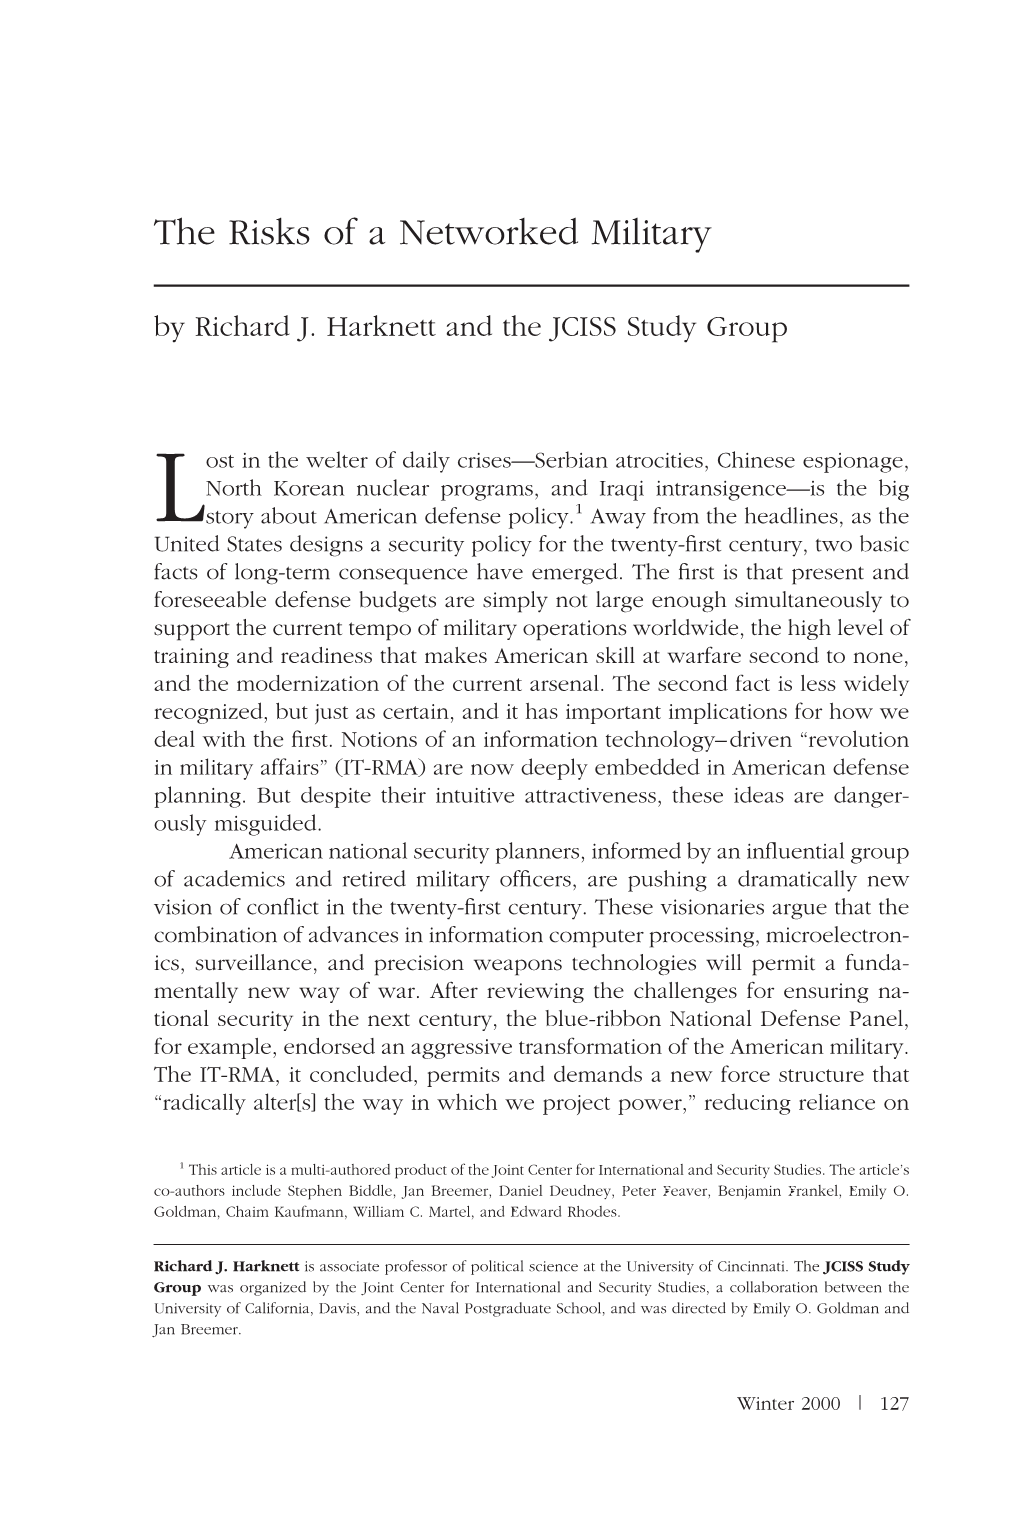 The Risks of a Networked Military by Richard J